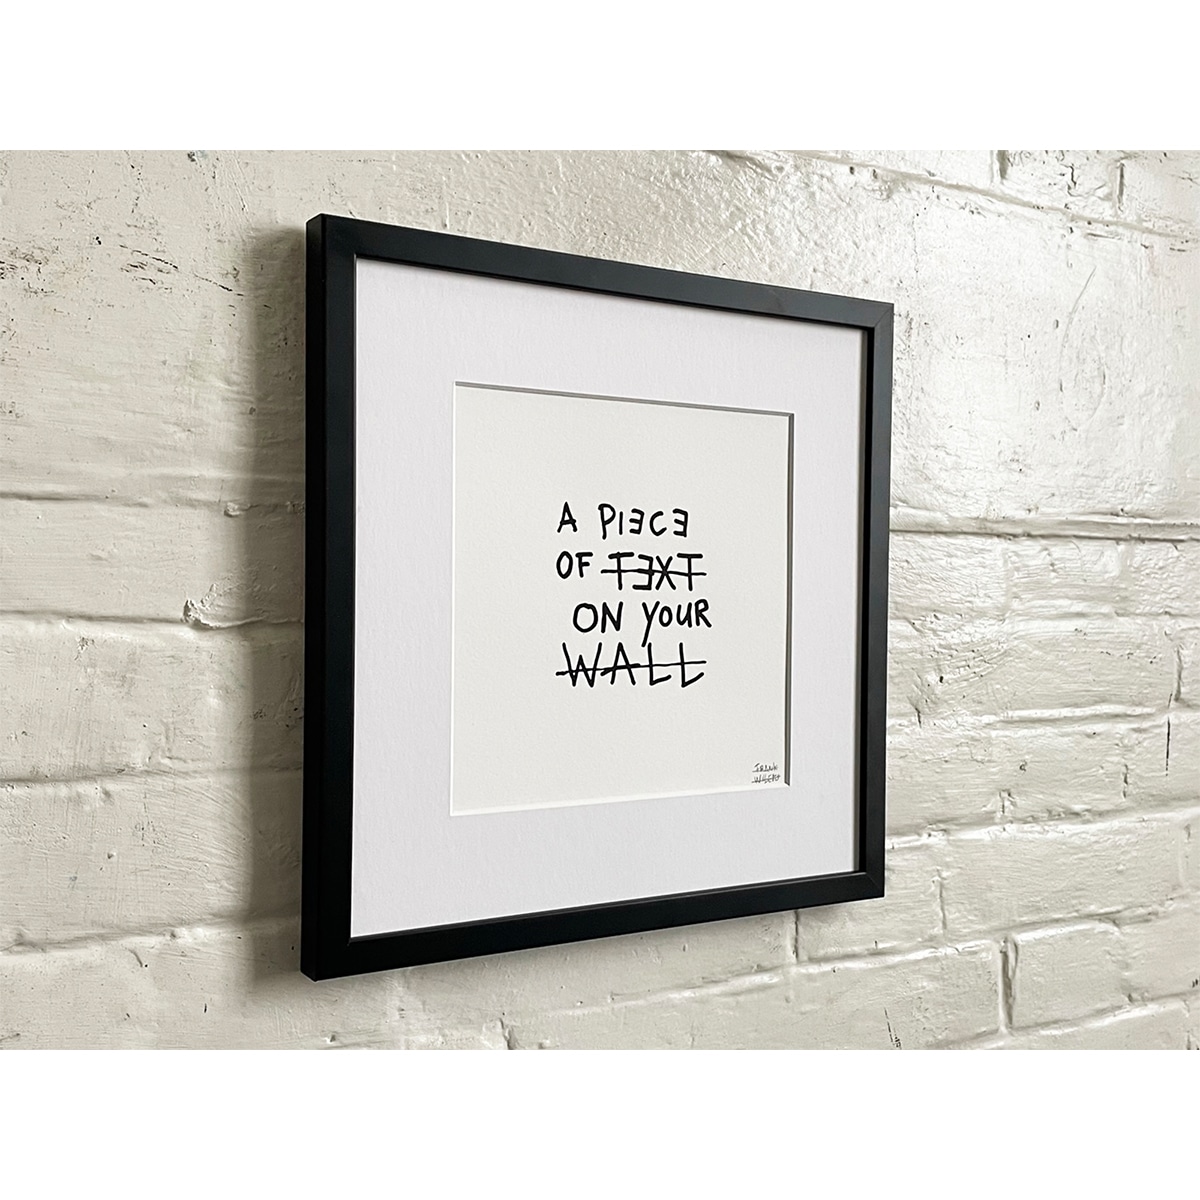 Limited Edt Text Prints -_0000_A PIECE OF TEXT ON YOUR WALL 01 - Frank Willems